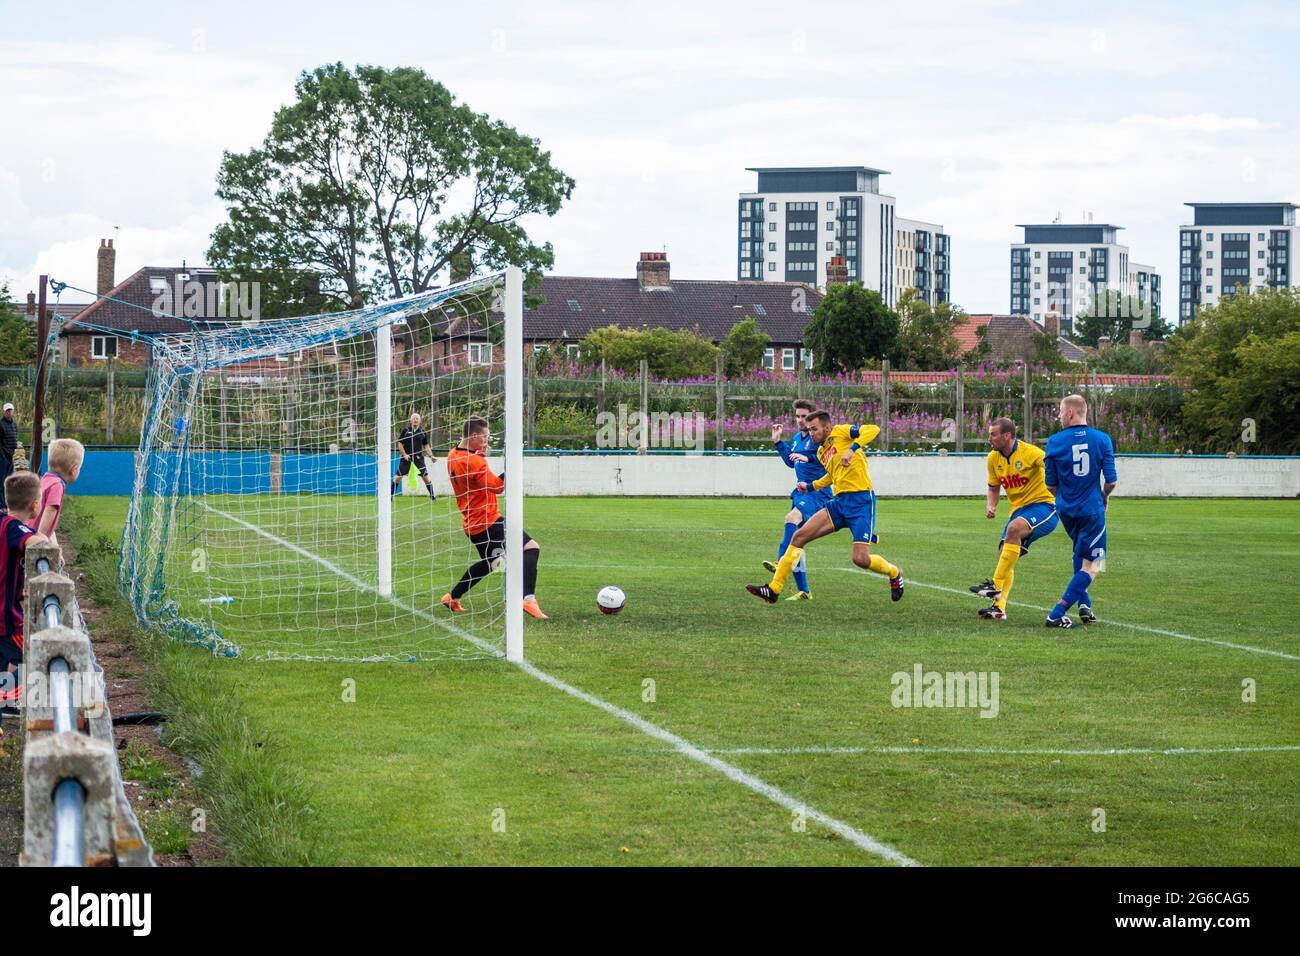 Local football match between Billingham and Stockton in north east England,UK.Forward strikes ball past keeper Stock Photo